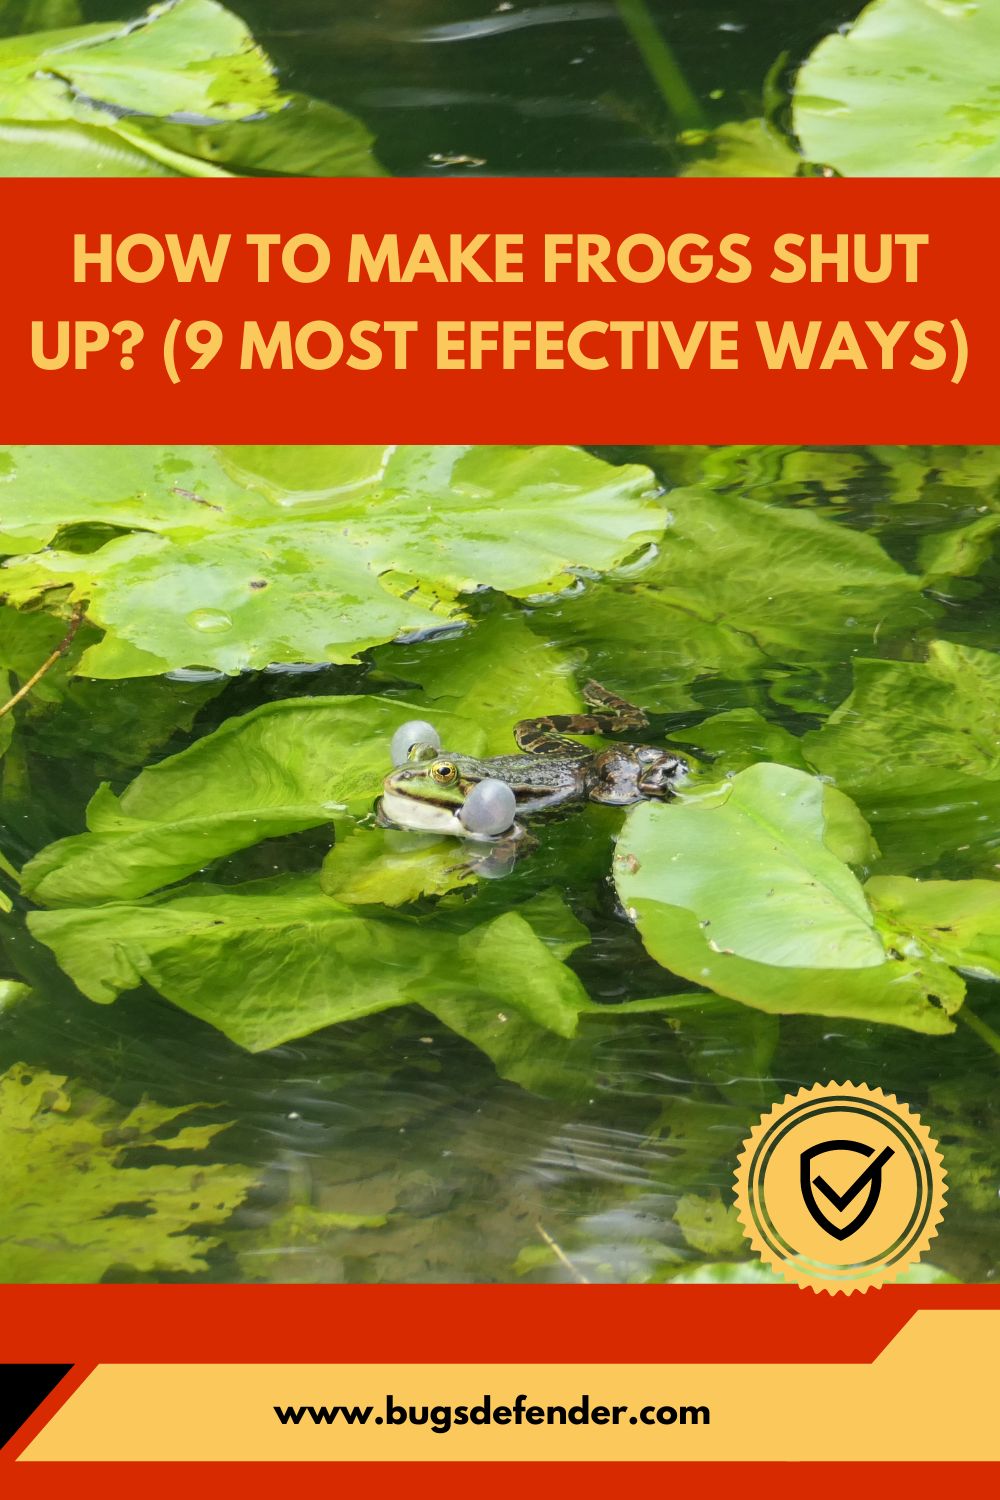 How To Make Frogs Shut Up? (9 Most Effective Ways) pin1